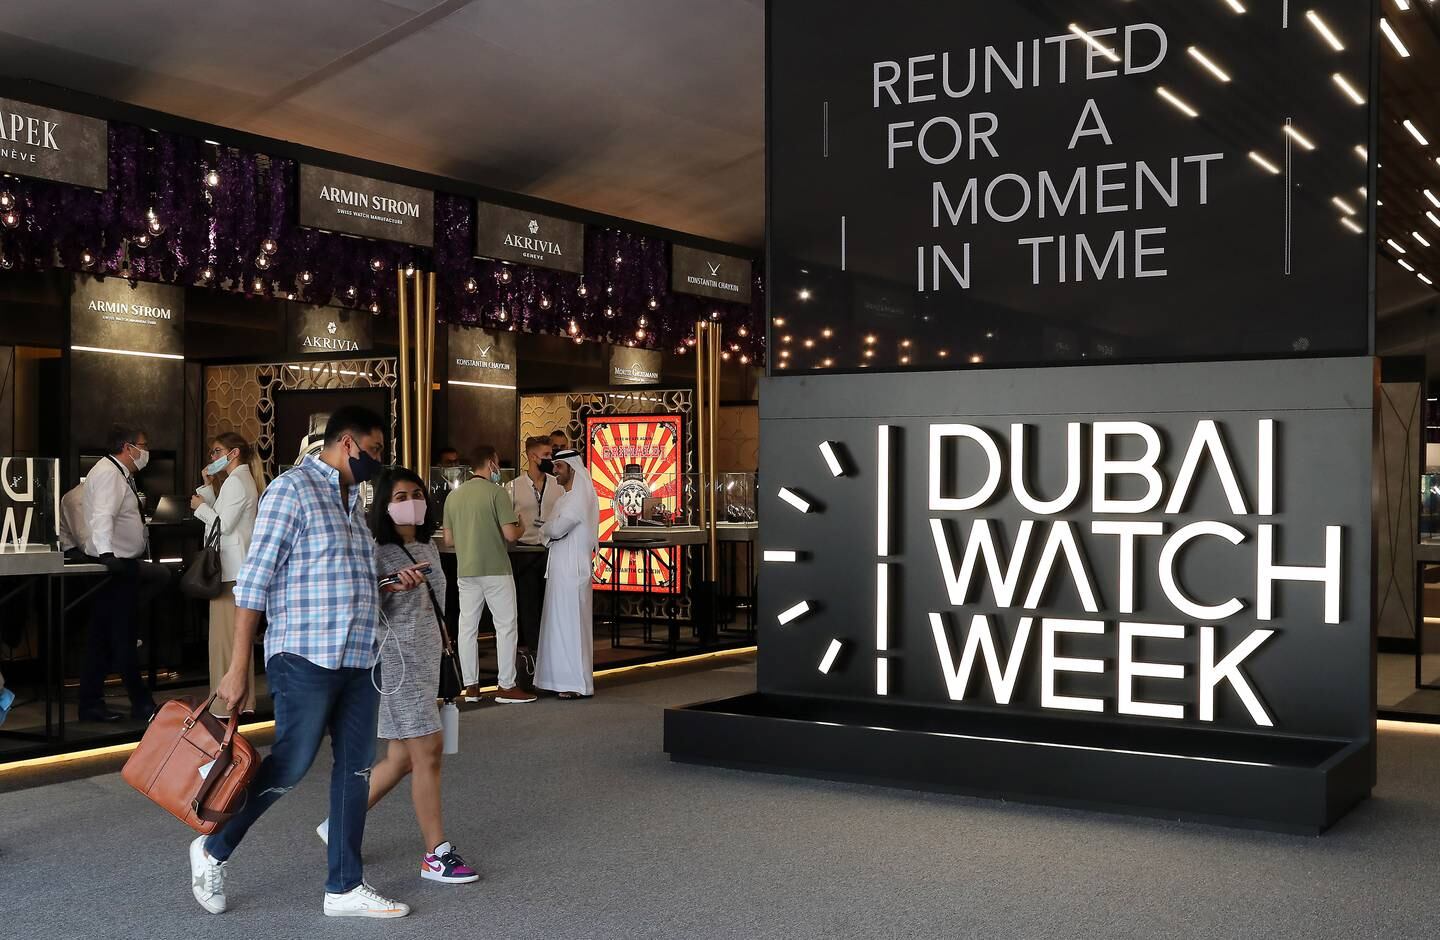 Visitors at the Dubai Watch Week 2021 held at DIFC Gate in Dubai on 24th November, 2021. Pawan Singh / The National